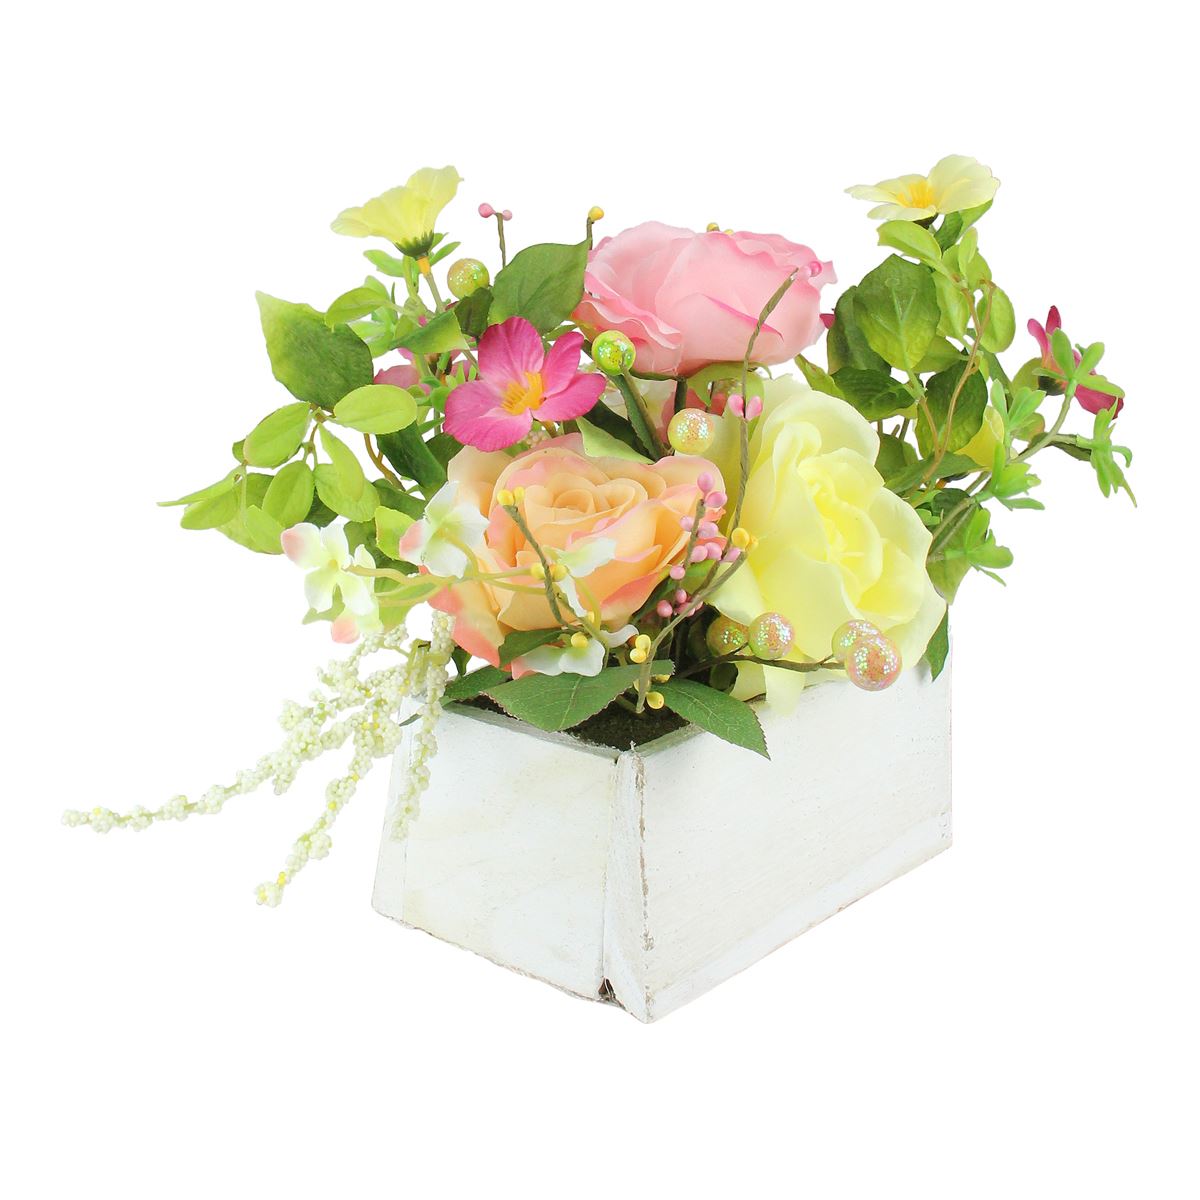 Northlight Seasonal Artificial Flowers And Greenery In A Planter